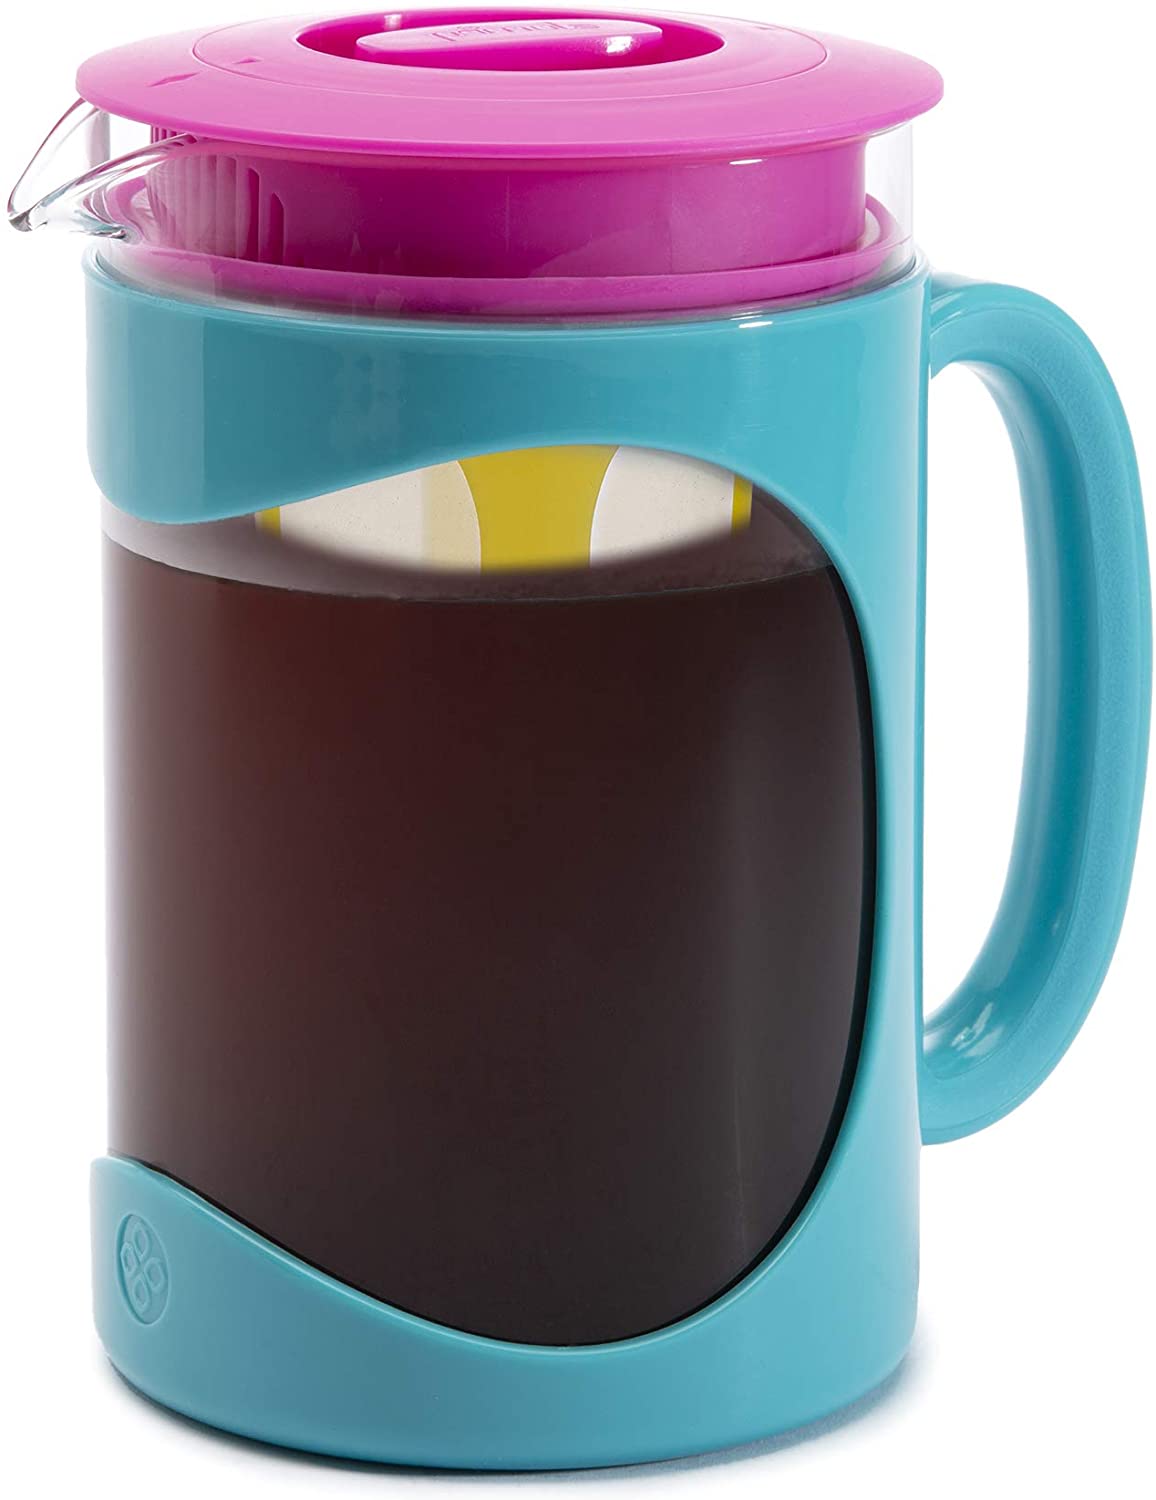 Primula Burke Throwback Deluxe Cold Brew Iced Coffee Maker, Comfort Grip Handle, Durable Glass Carafe, Removable Mesh Filter, Perfect 6 Cup Size, 1.6 Qt, Multicolor